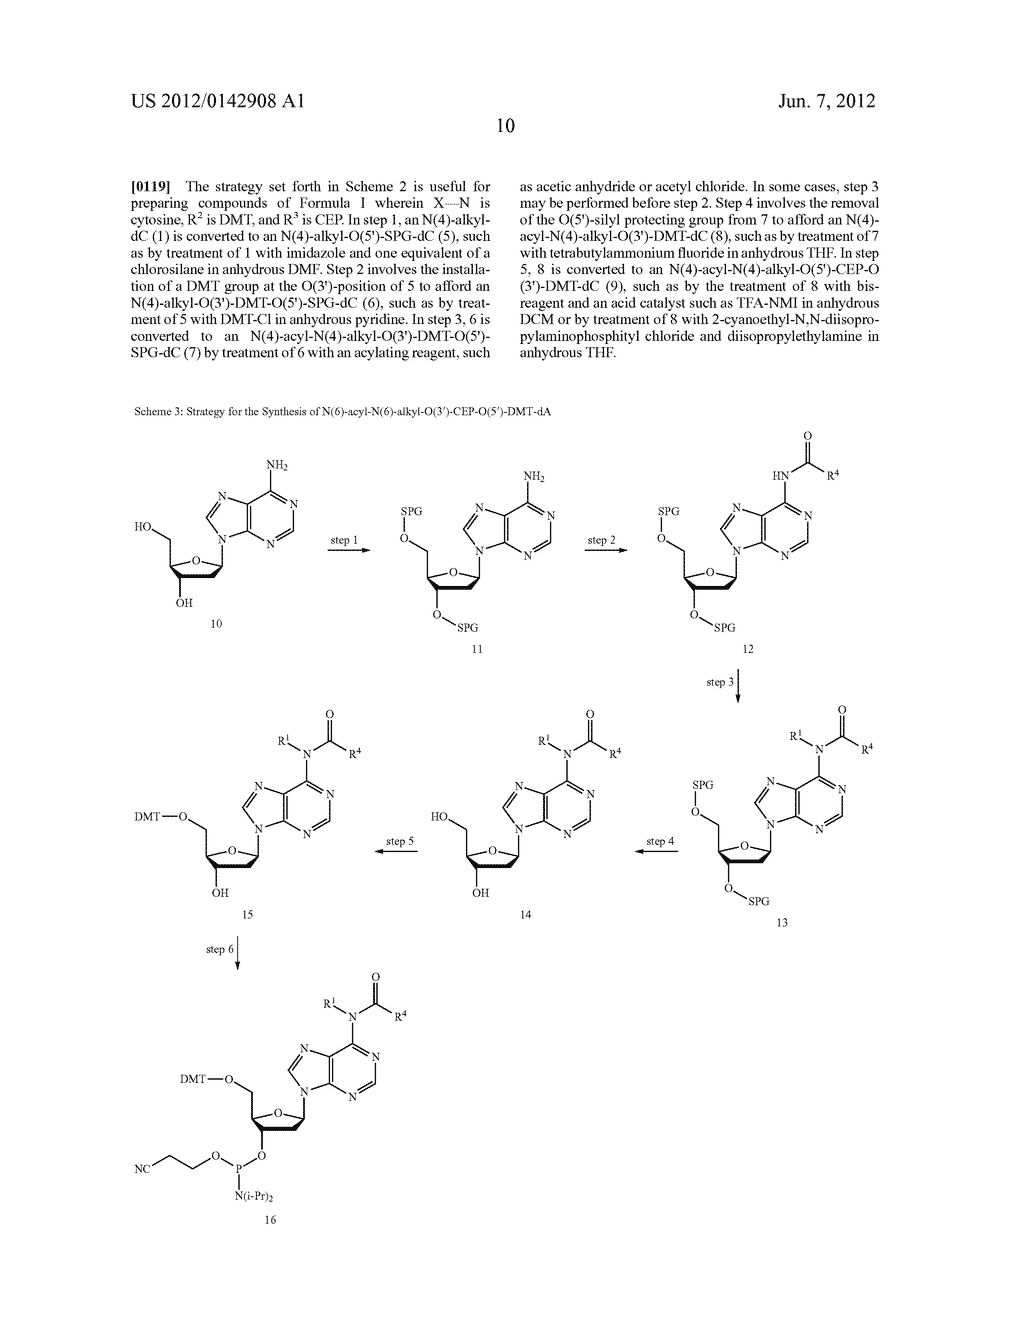 COMPOUNDS FOR THE SYNTHETIC INTRODUCTION OF N-ALKYL NUCLEOSIDES INTO DNA     OLIGONUCLEOTIDES - diagram, schematic, and image 11